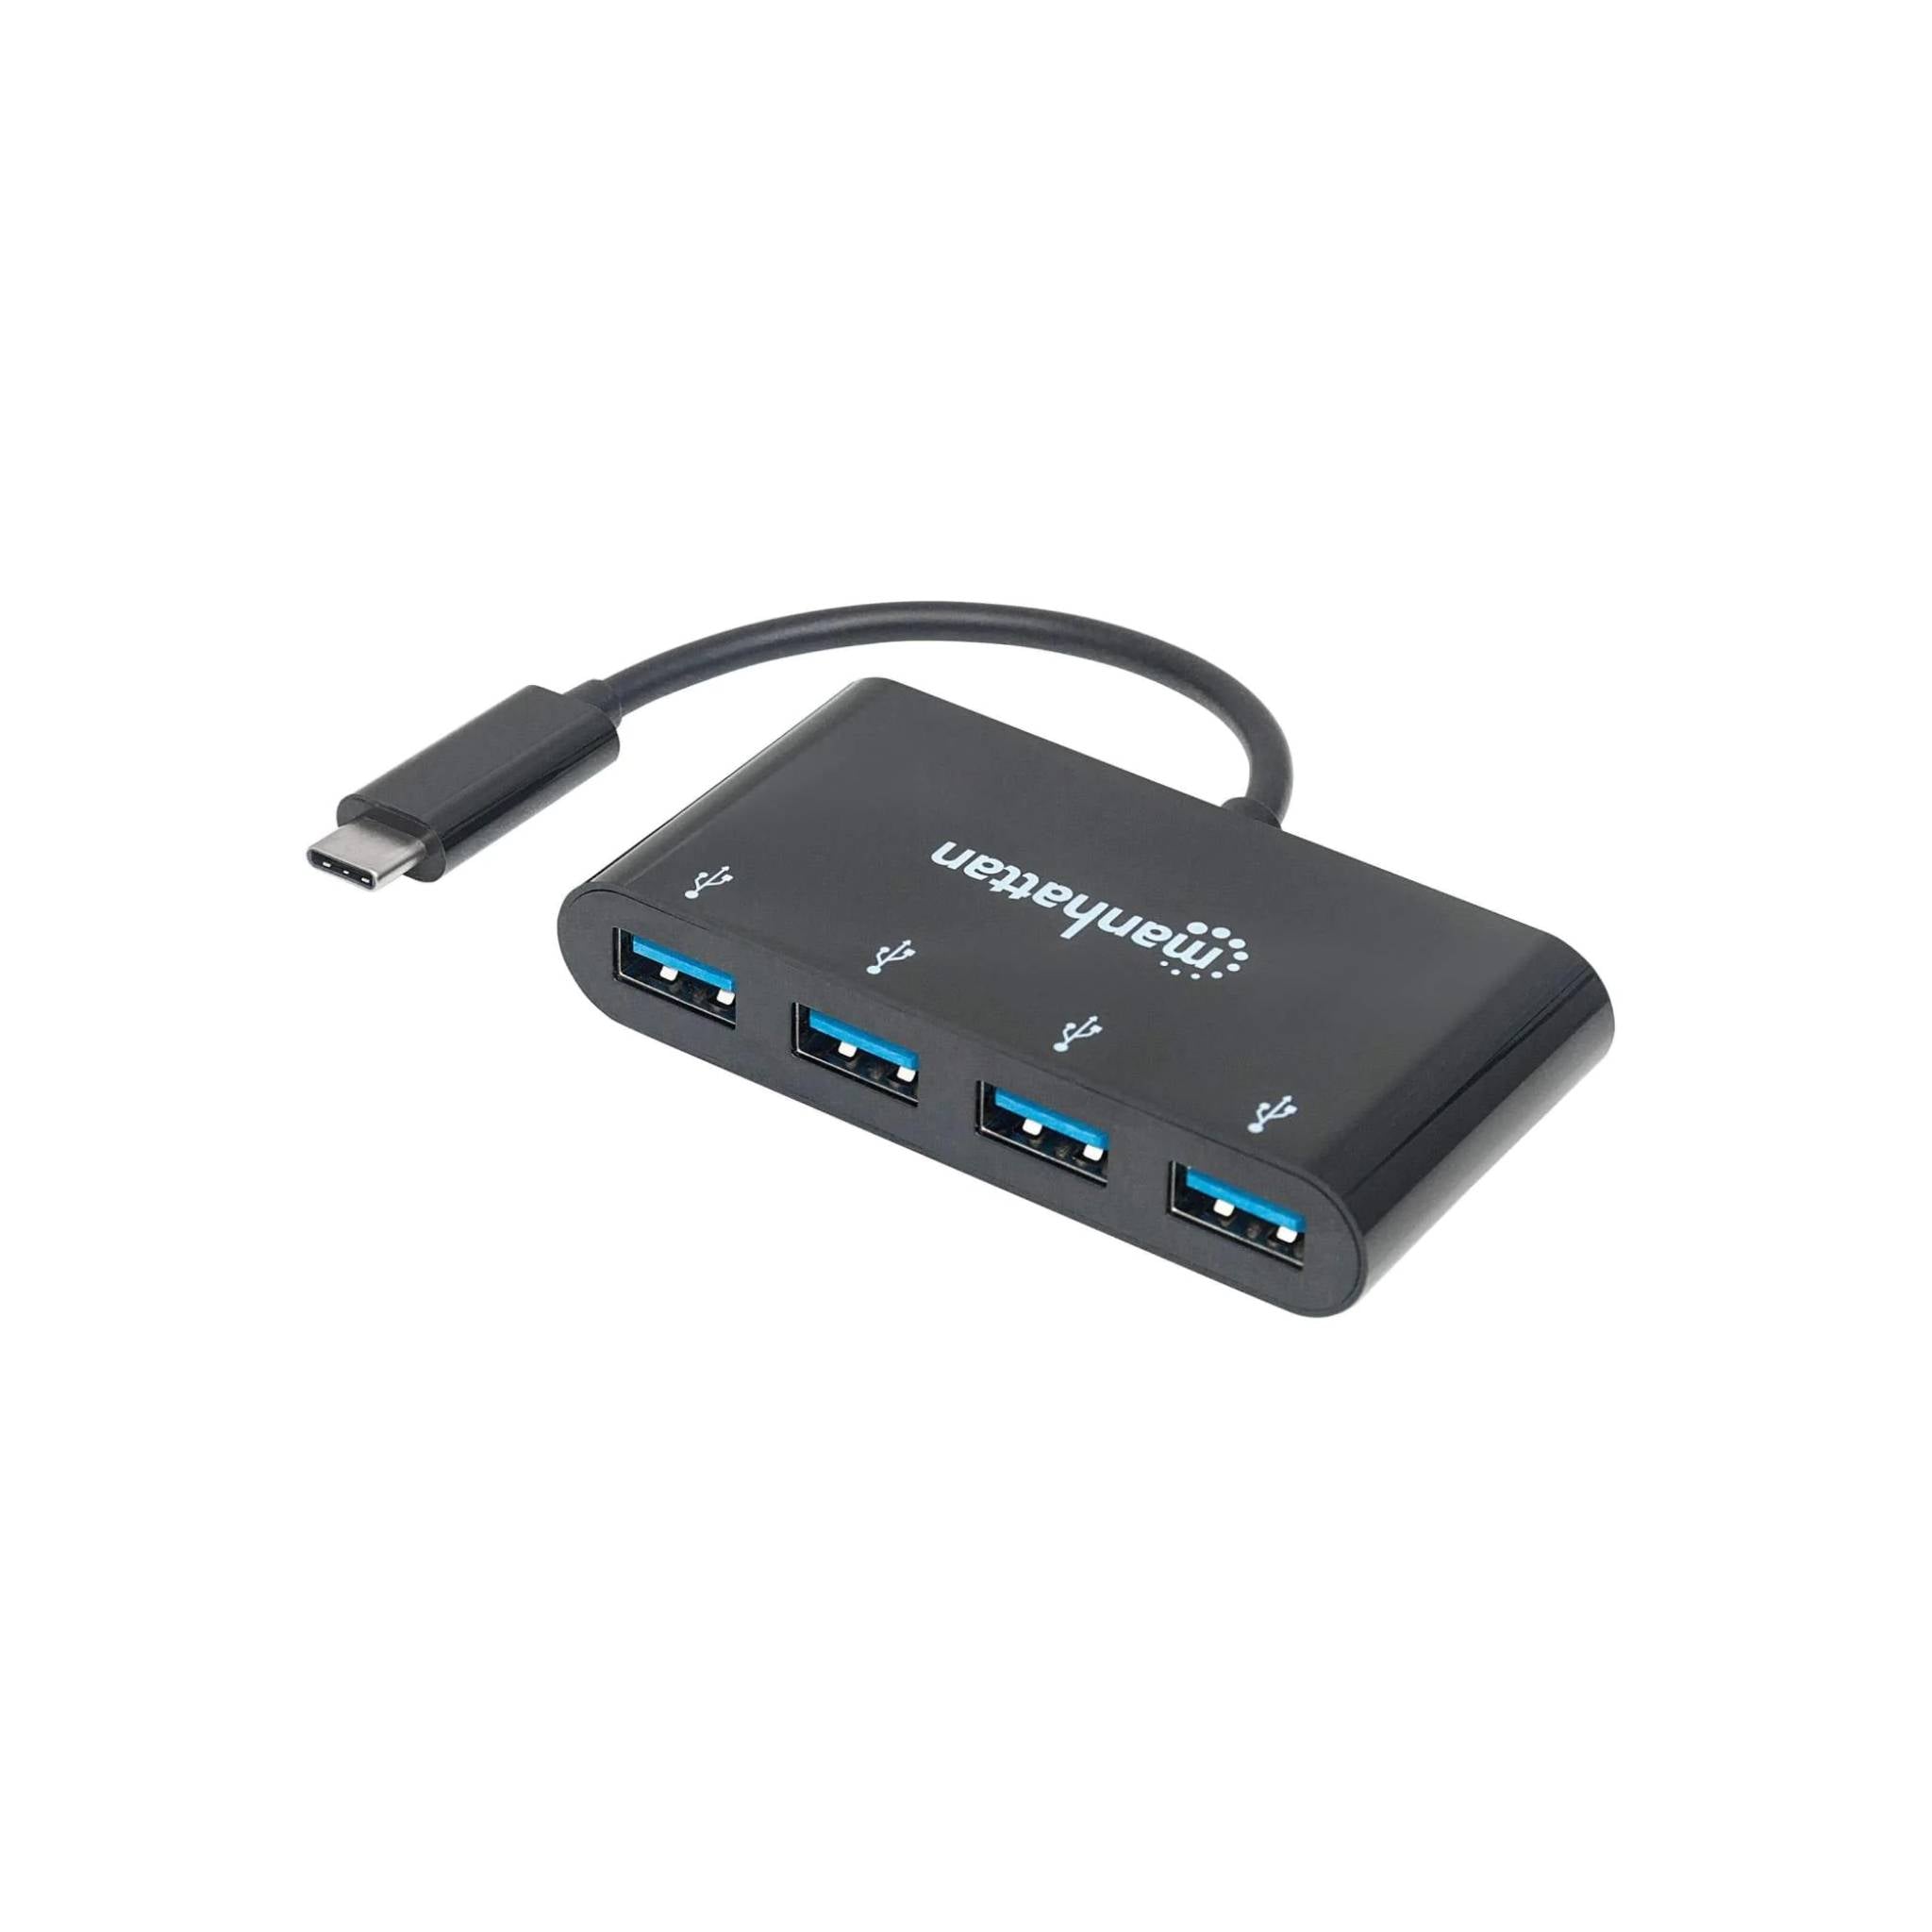 High-Speed 4-Port USB 3.0 Type-C Hub: Add Multiple USB-A Ports for Faster Data Transfer